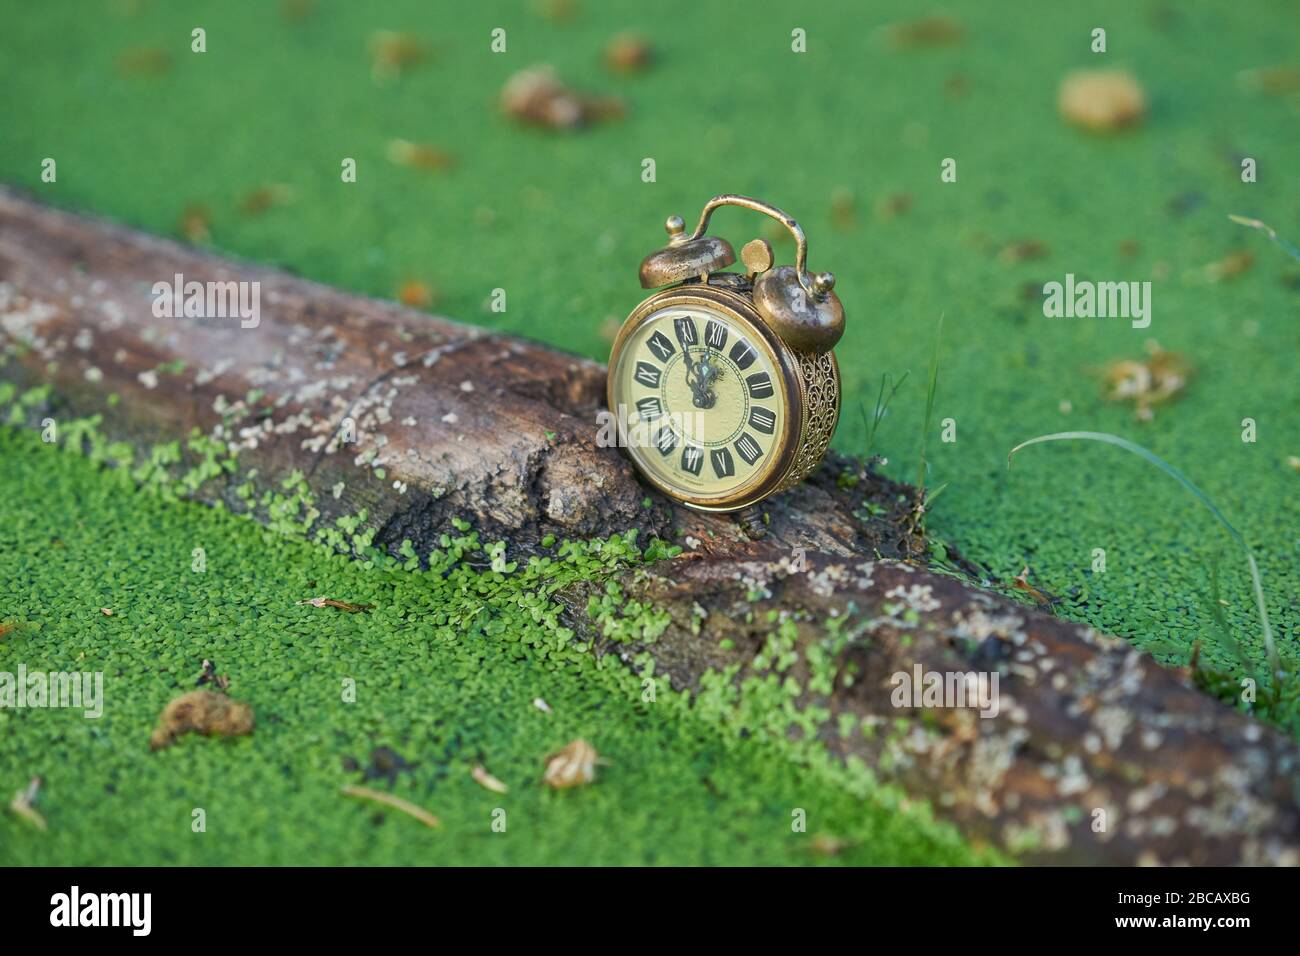 Conceptual image, time is running out for nature. Stock Photo